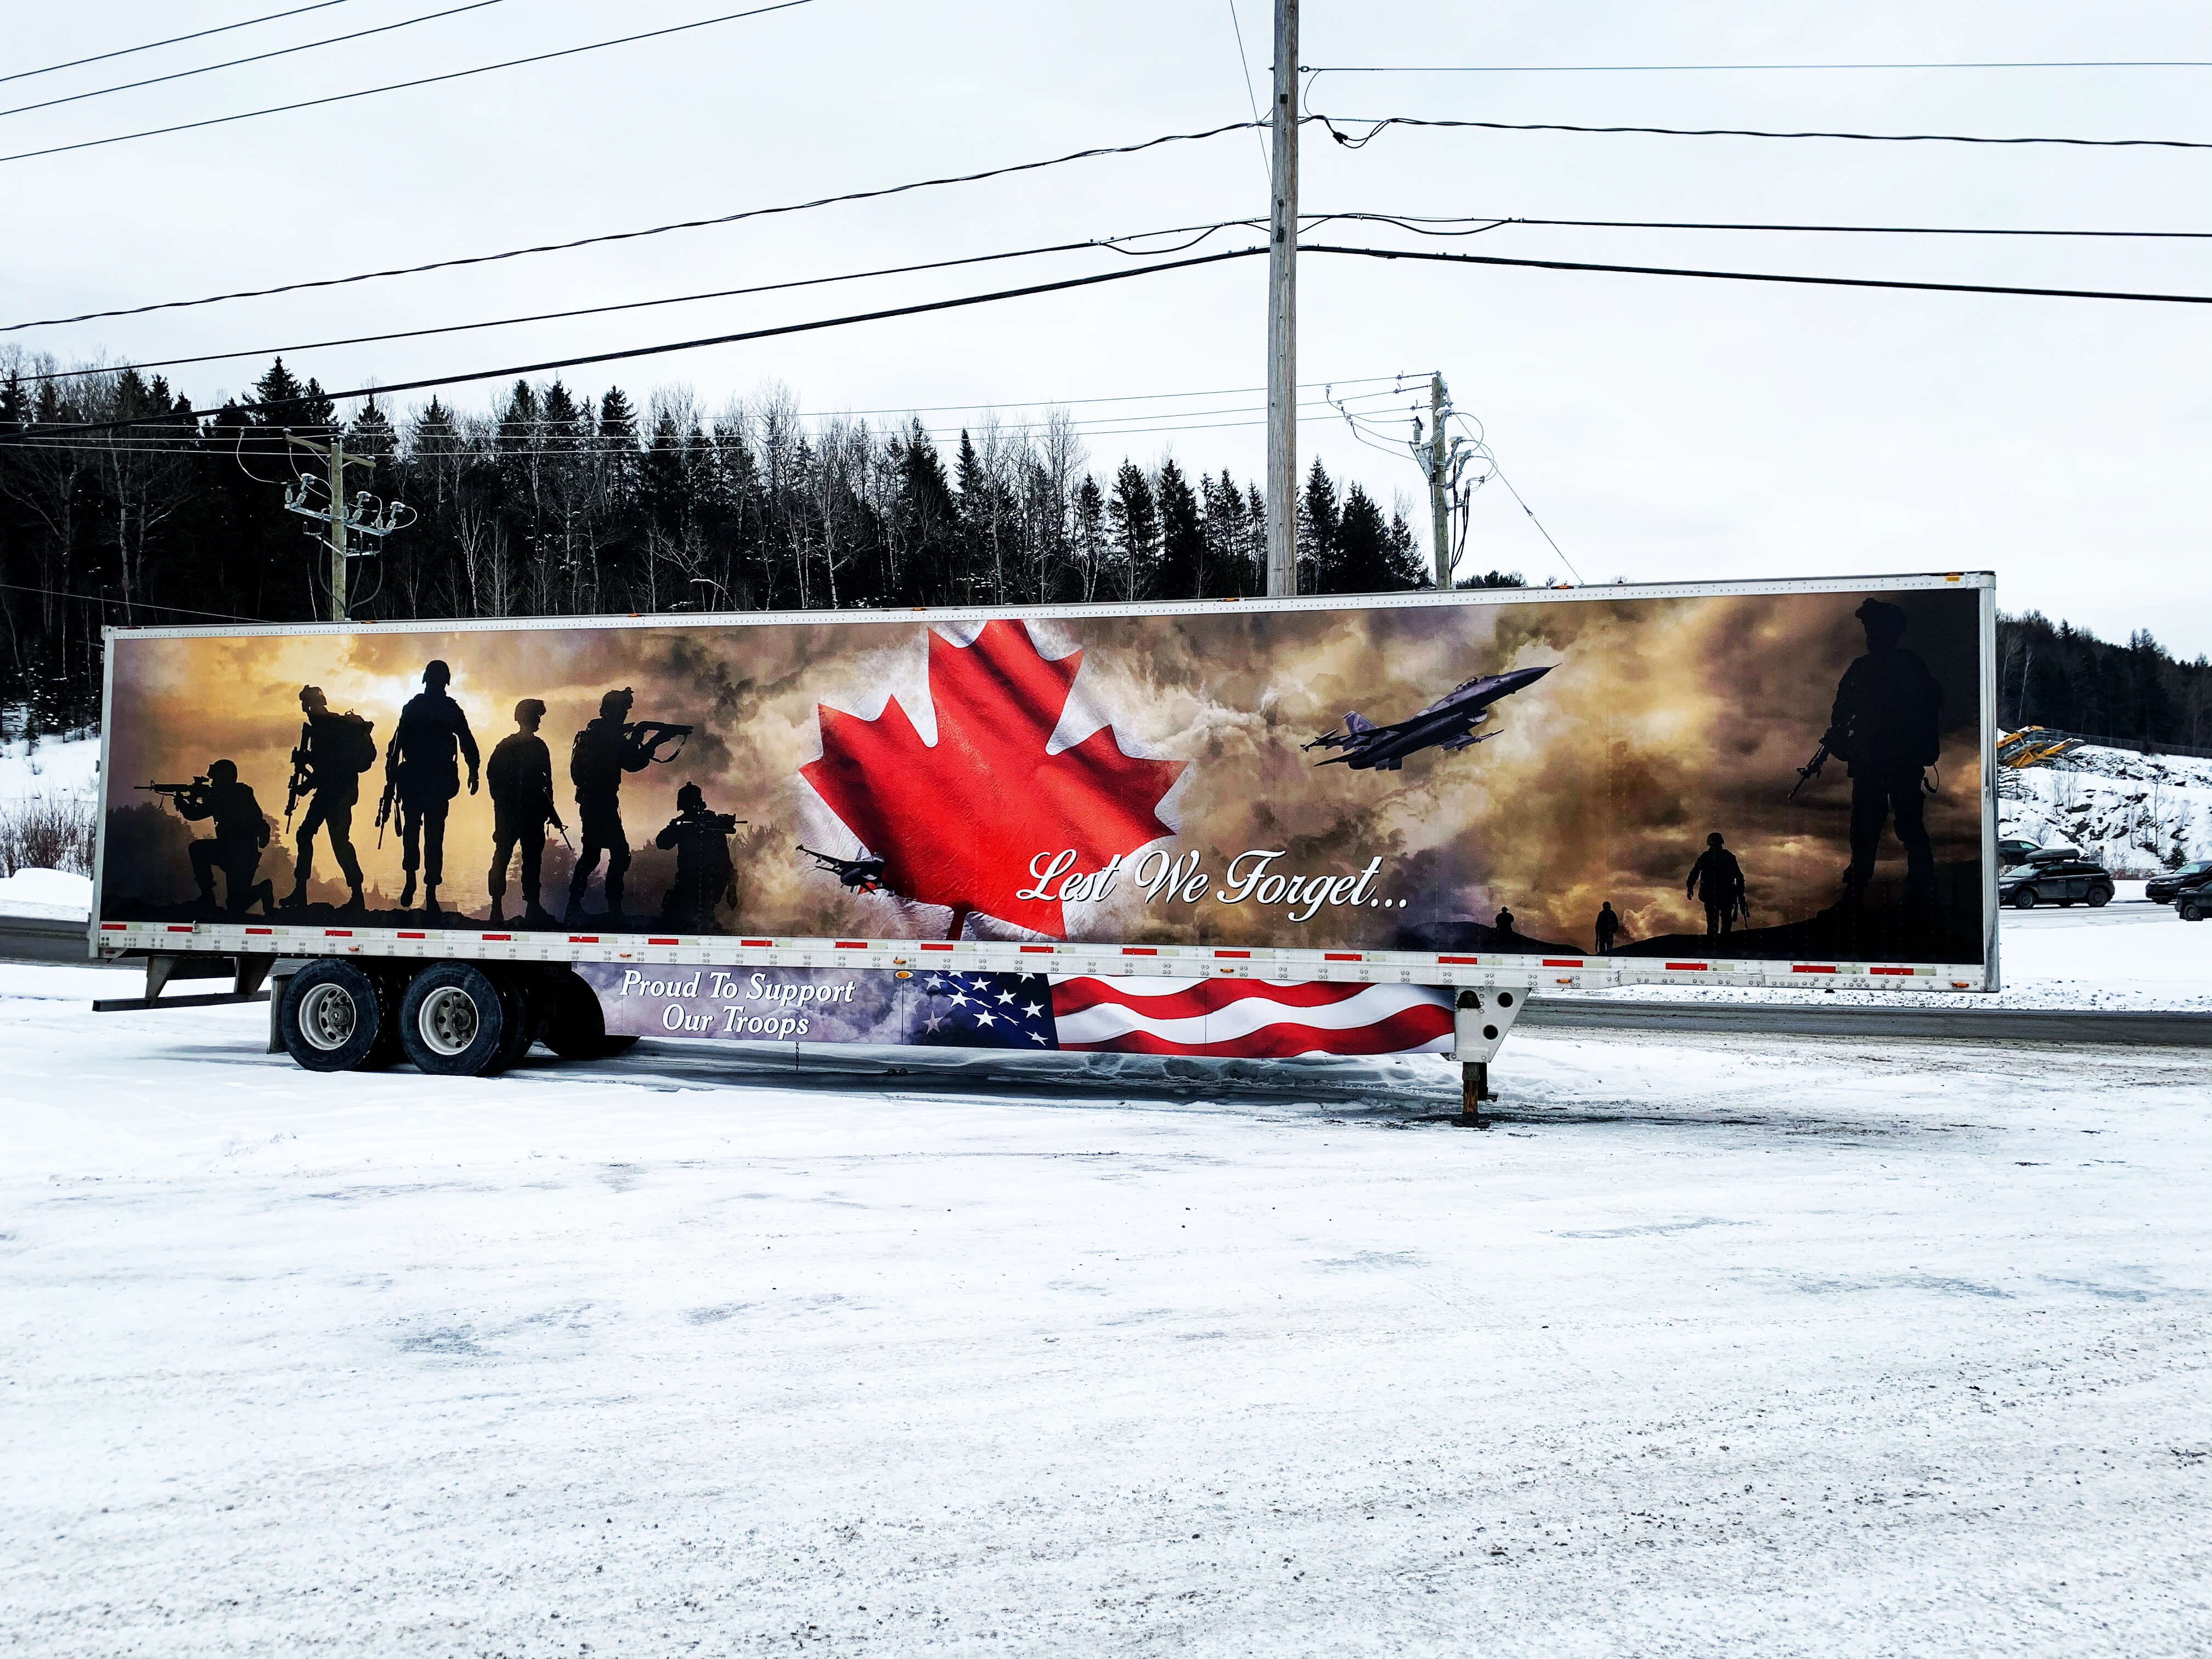 Trailer vinyl graphics with the design Lest we forget to support our troops by Turbo Images the leader in vehicle wrapping and trailer wraps so that your trailers will proudly represent your organization with their great wraps. For a great design and custom vinyl truck or trailer wrapping job, contact Turbo Images.